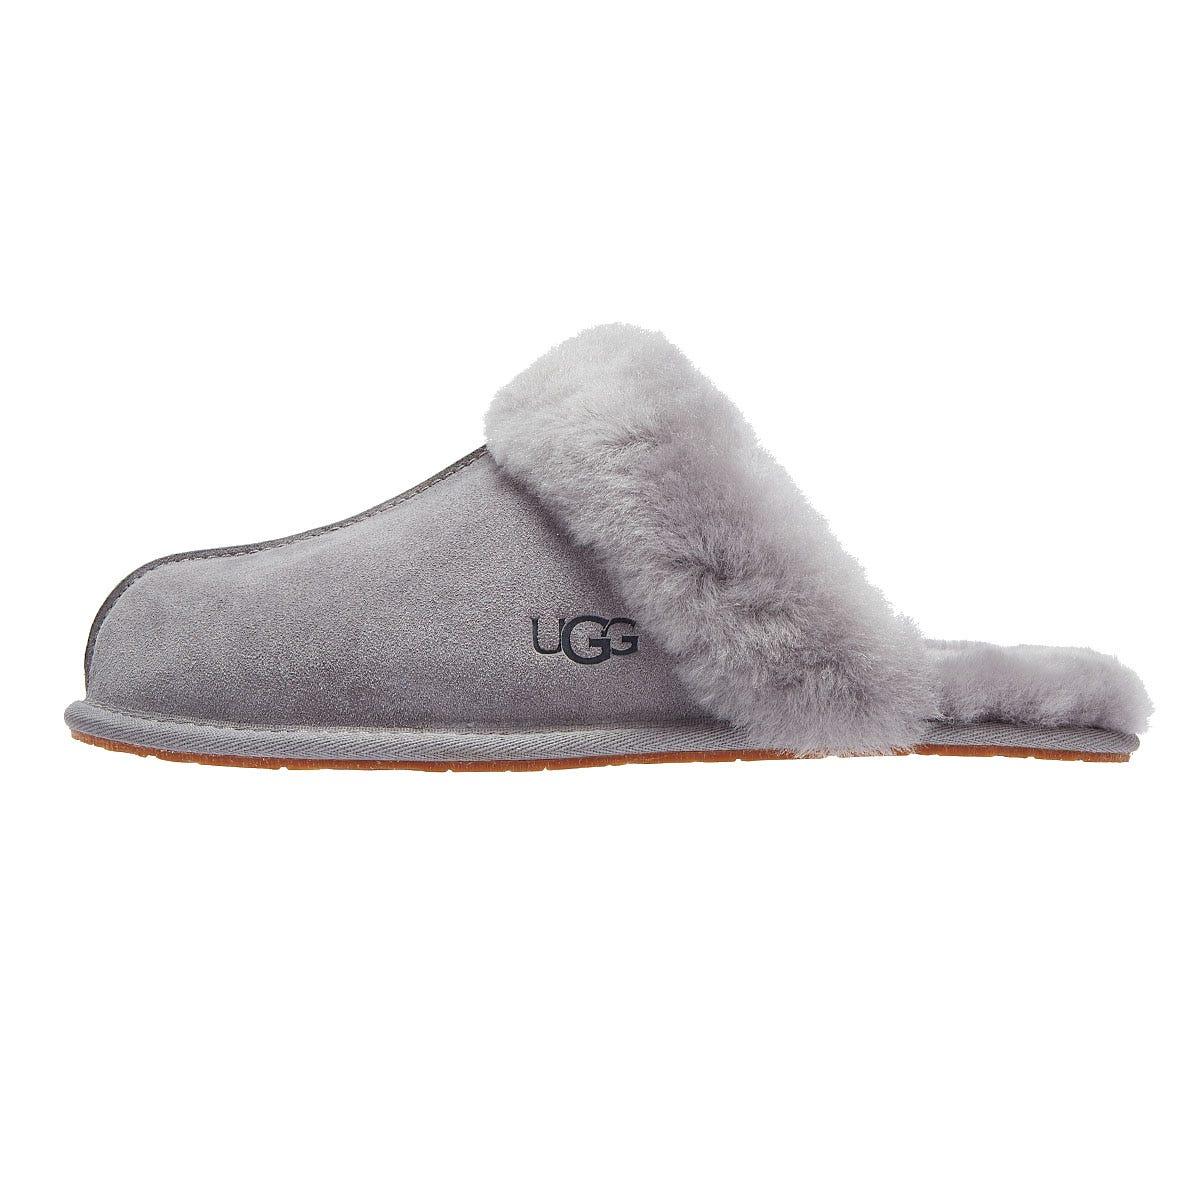 Ugg Slippers Scuffette Grey Hotsell, SAVE 34% - www.insomniacorp.com